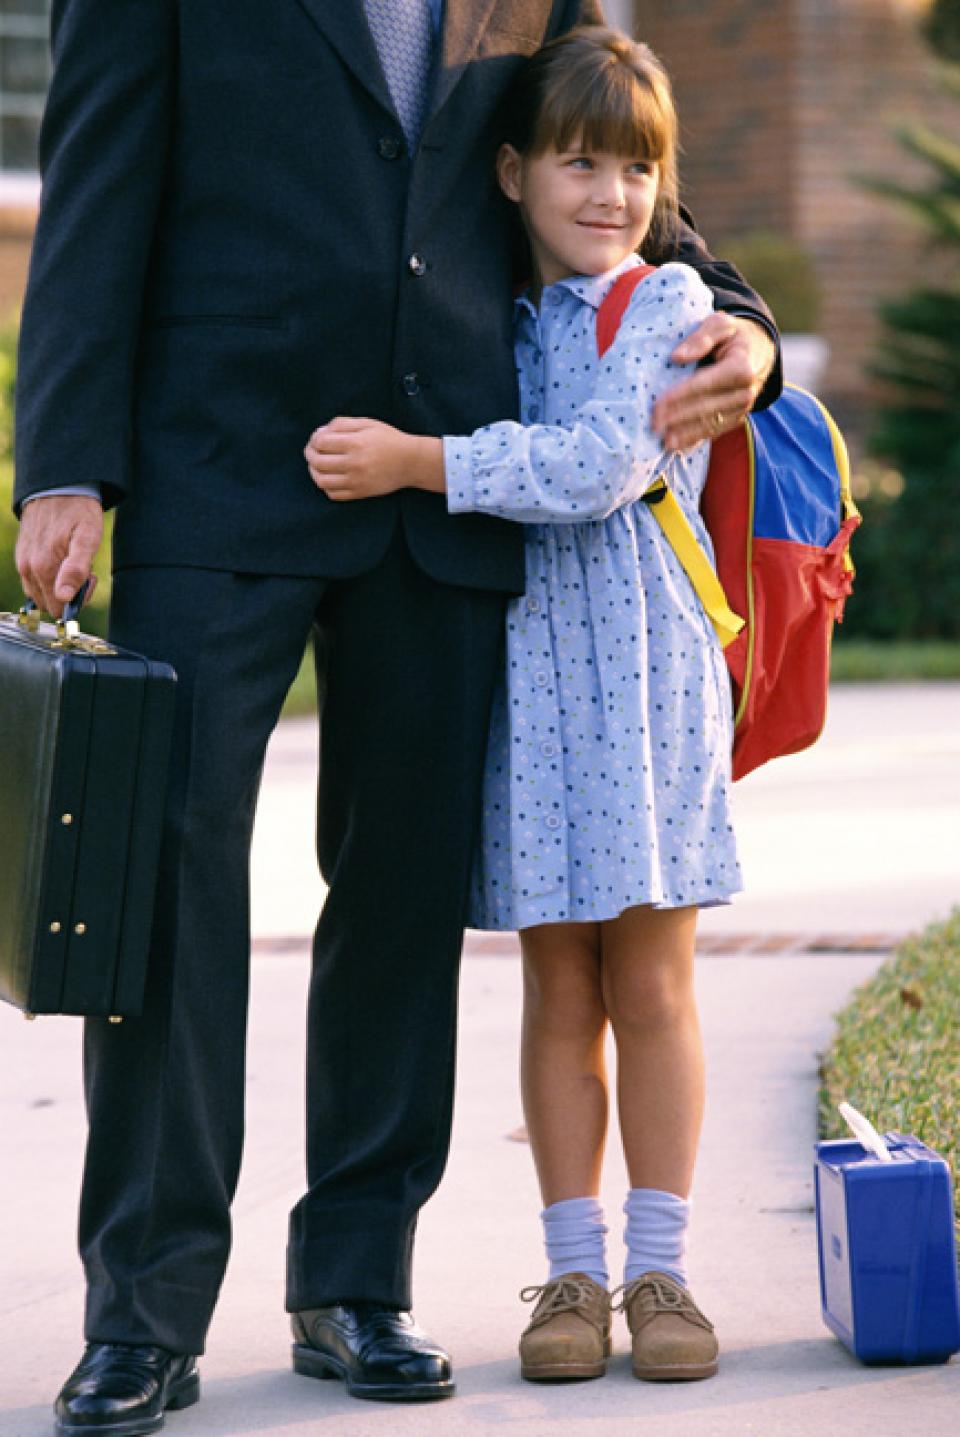 Daughter hugging dad before going off to school